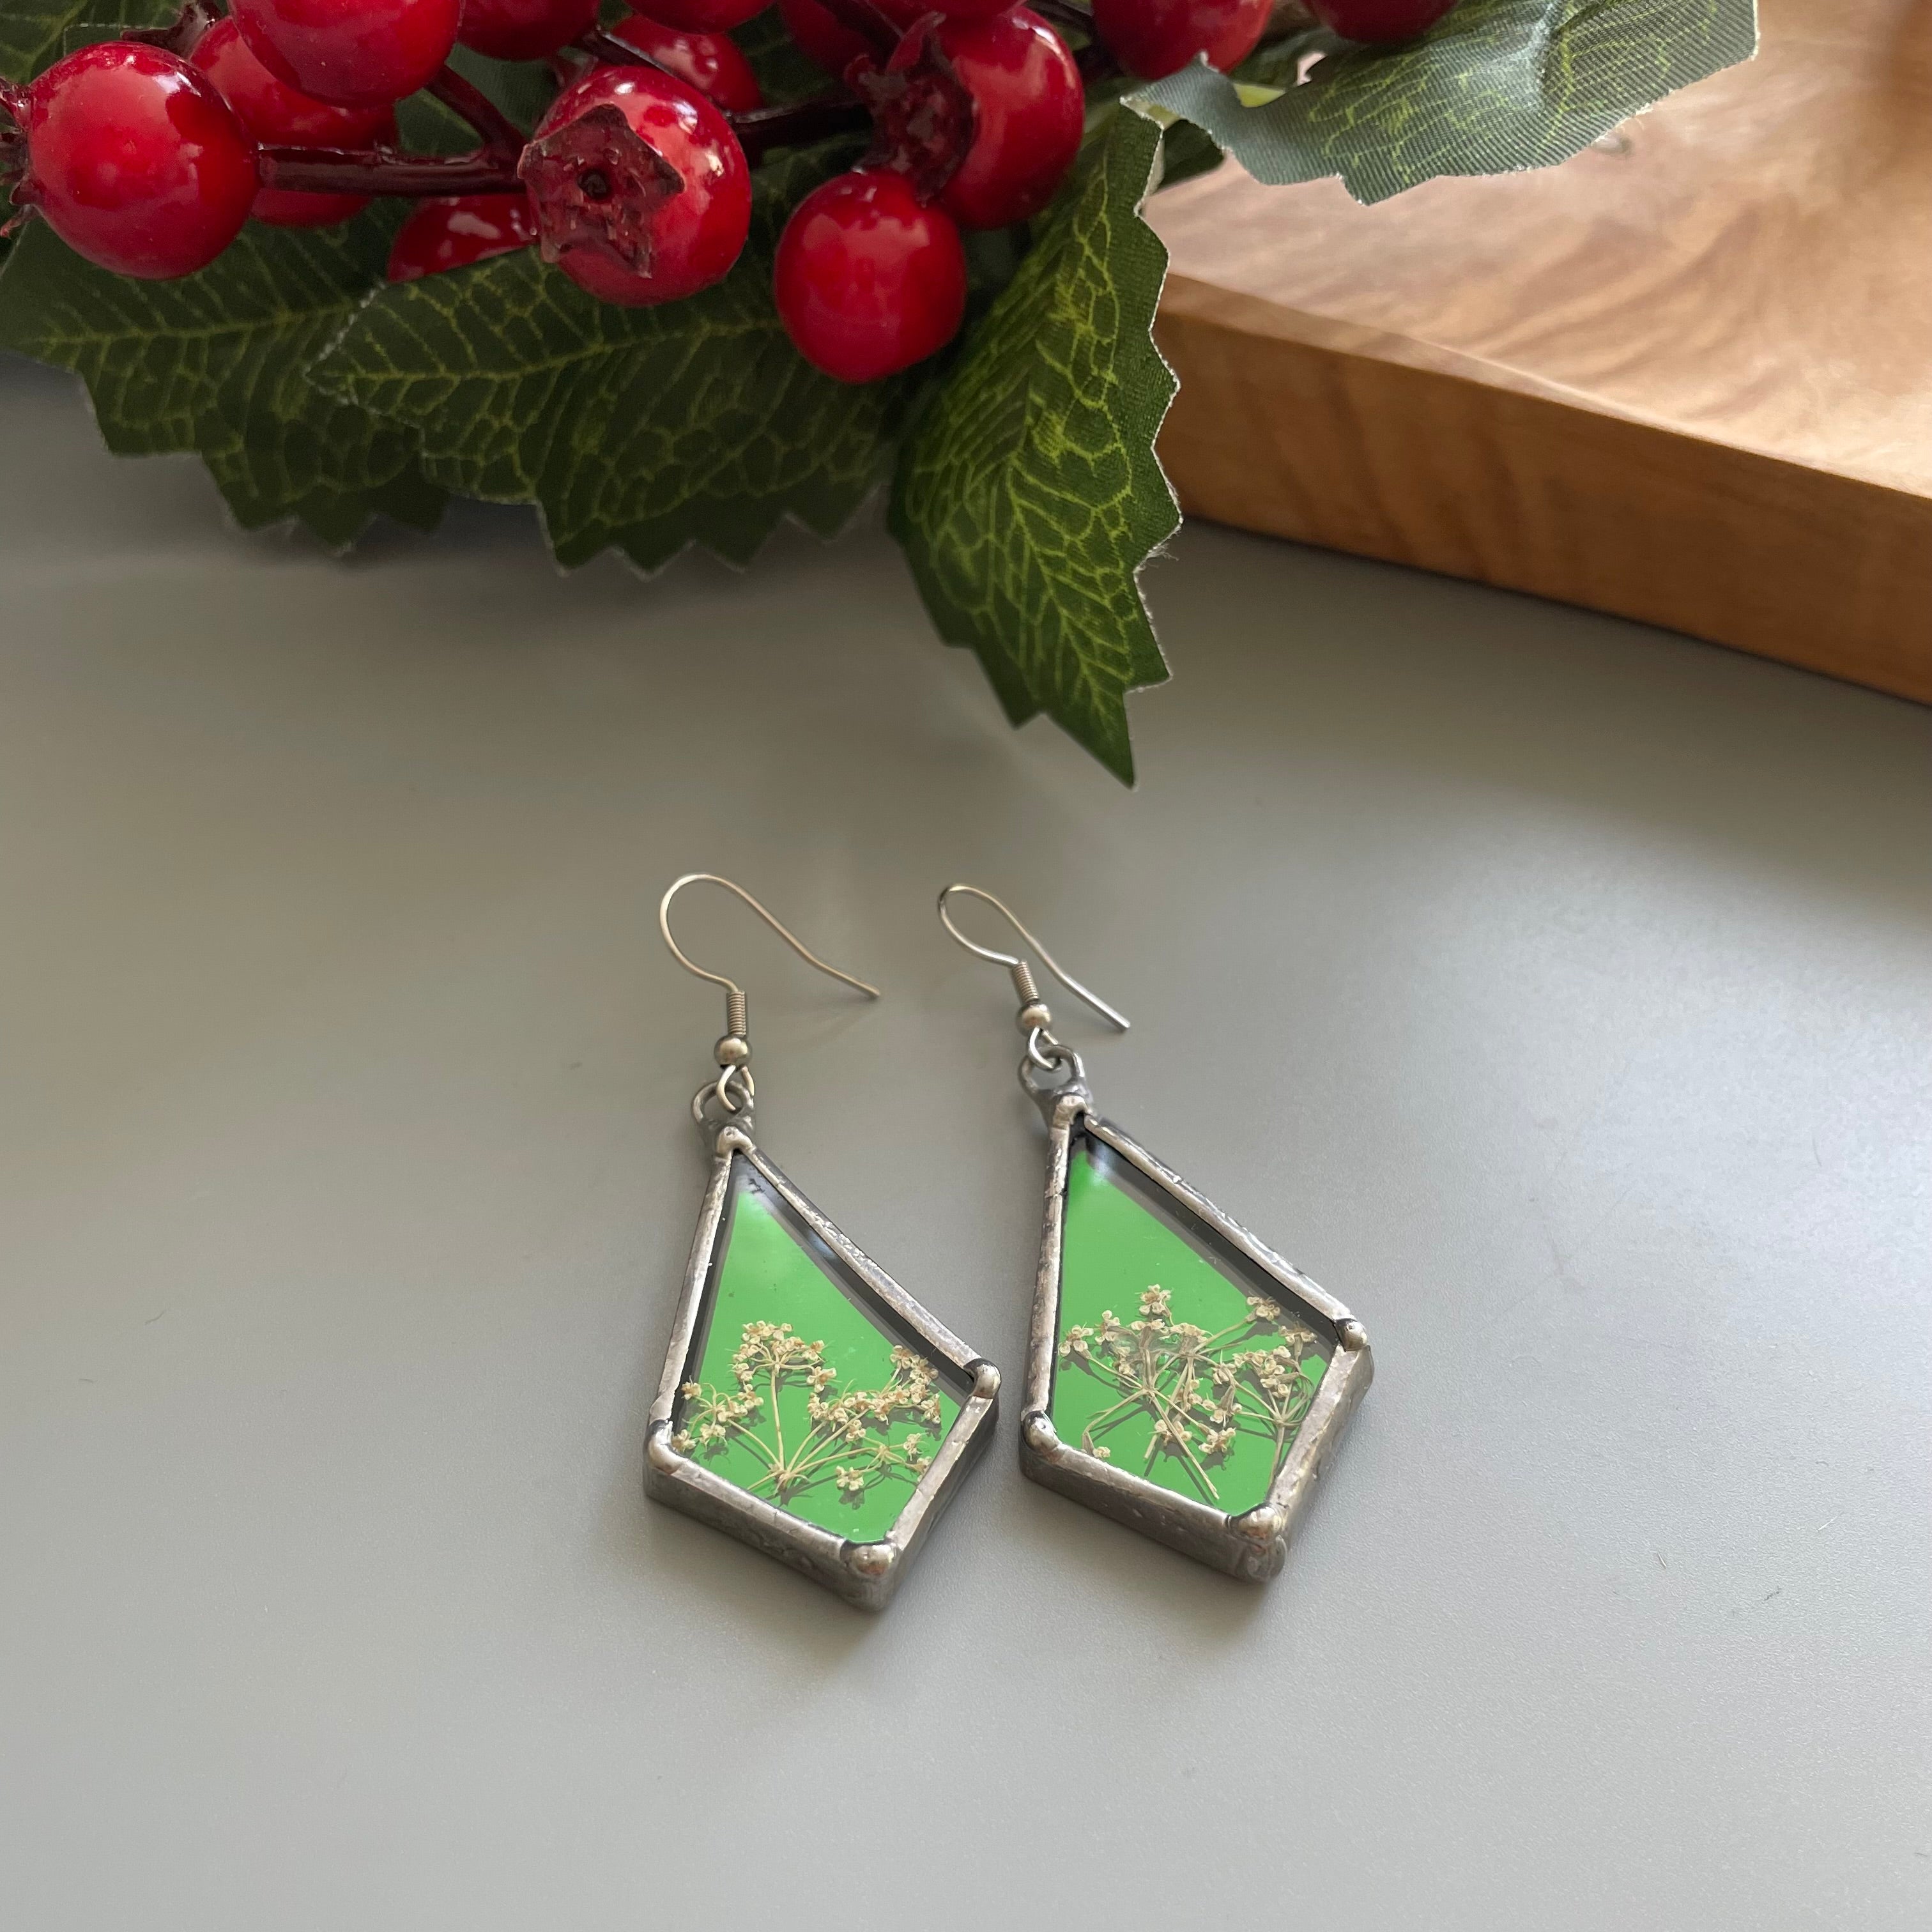 Stain Green Glass Earrings with Dried Flower